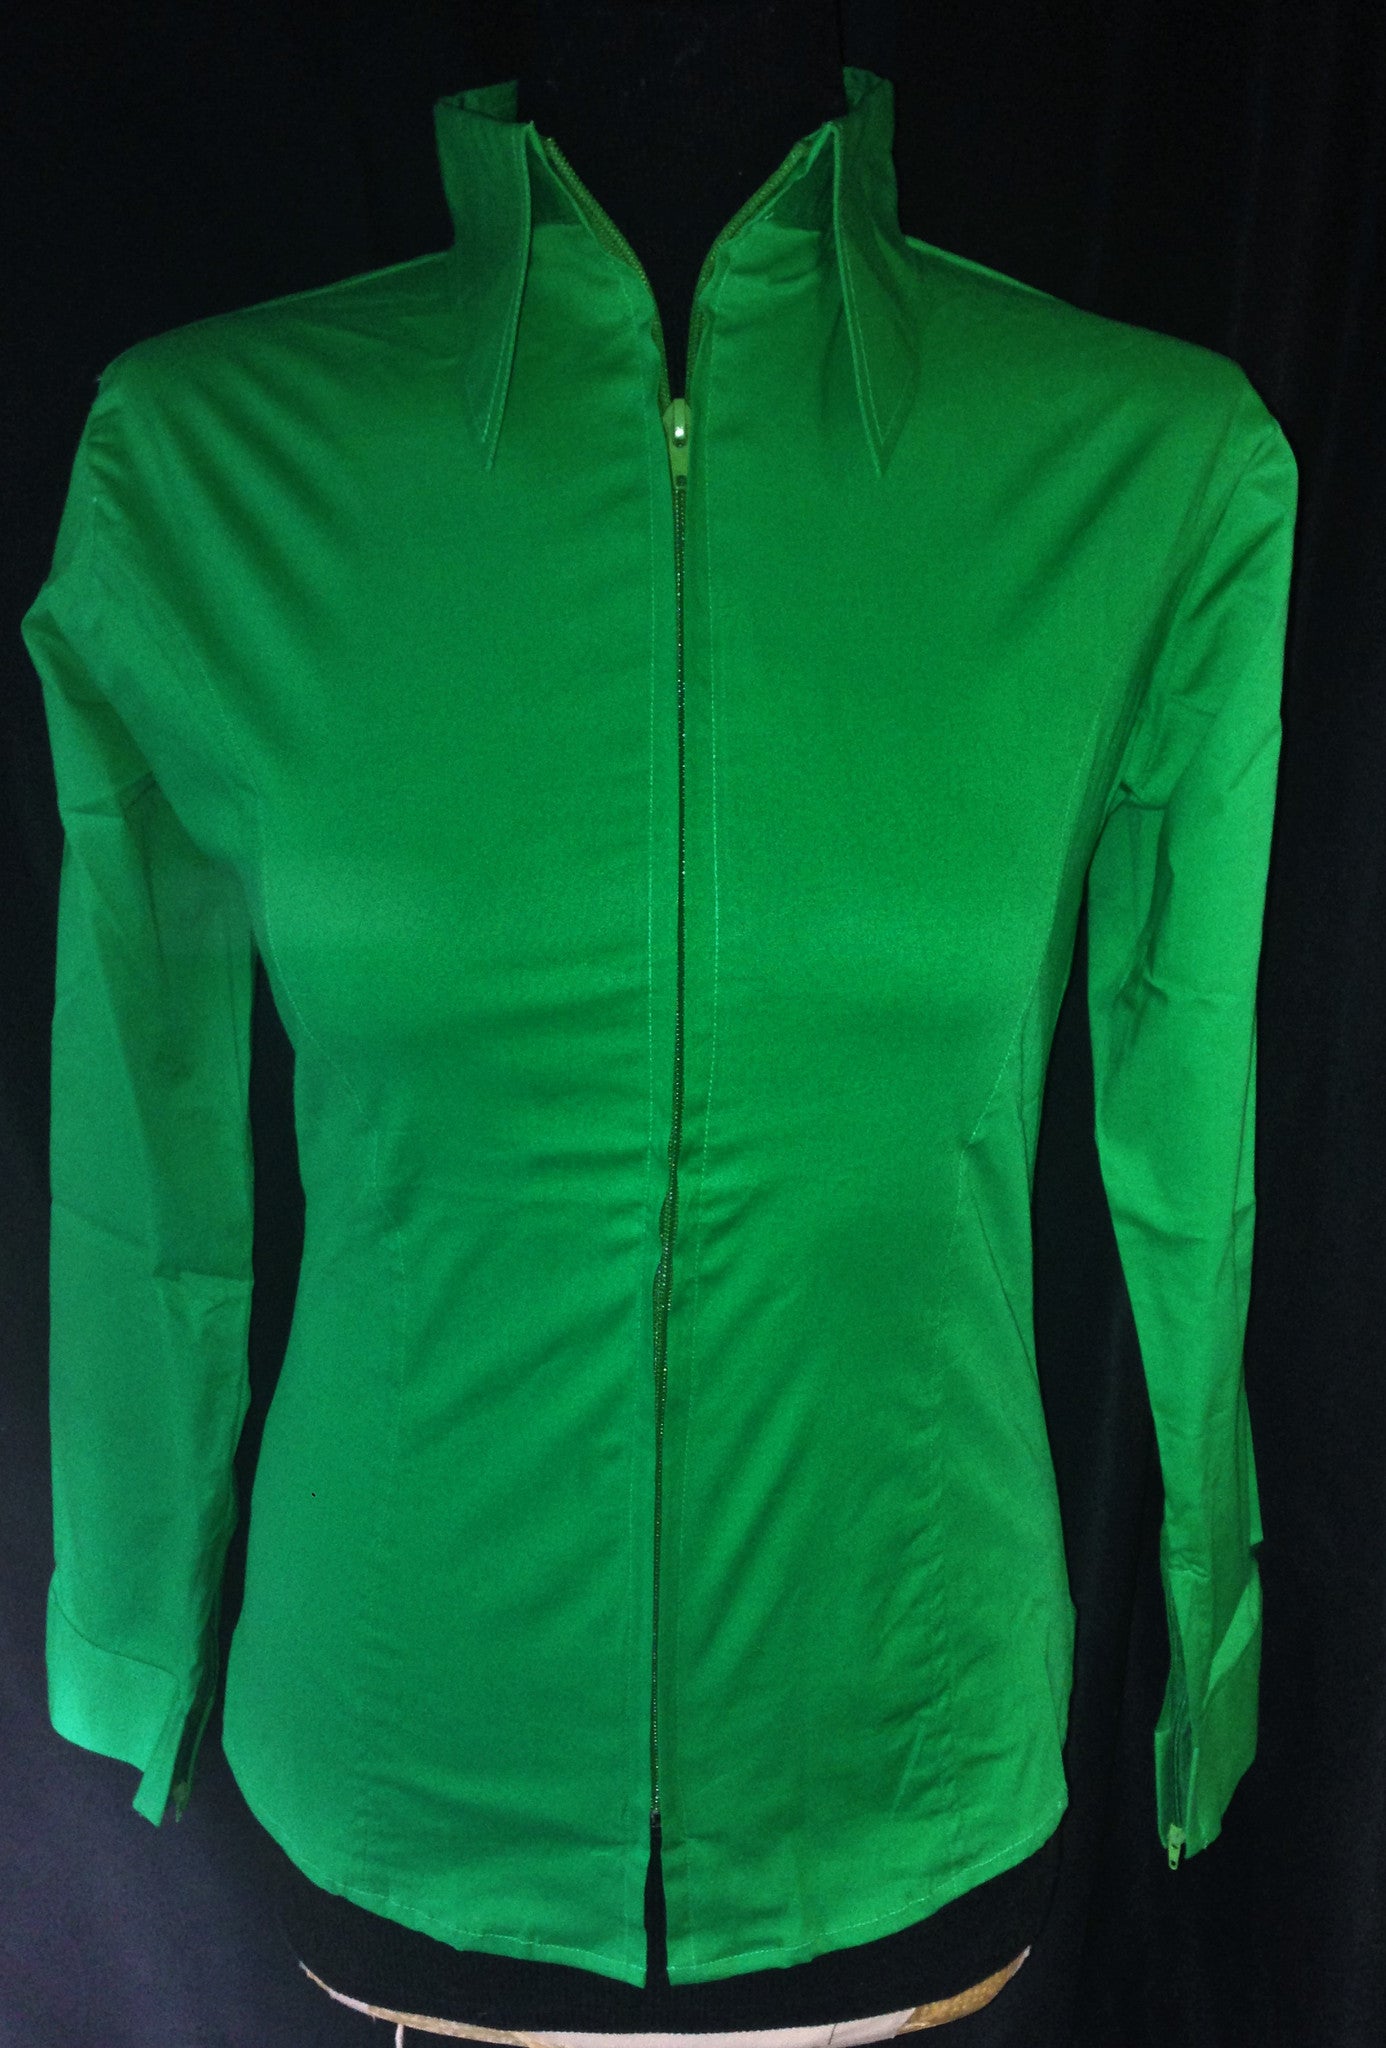 Ladies Zip Up Fitted Show Shirt - Emerald Green